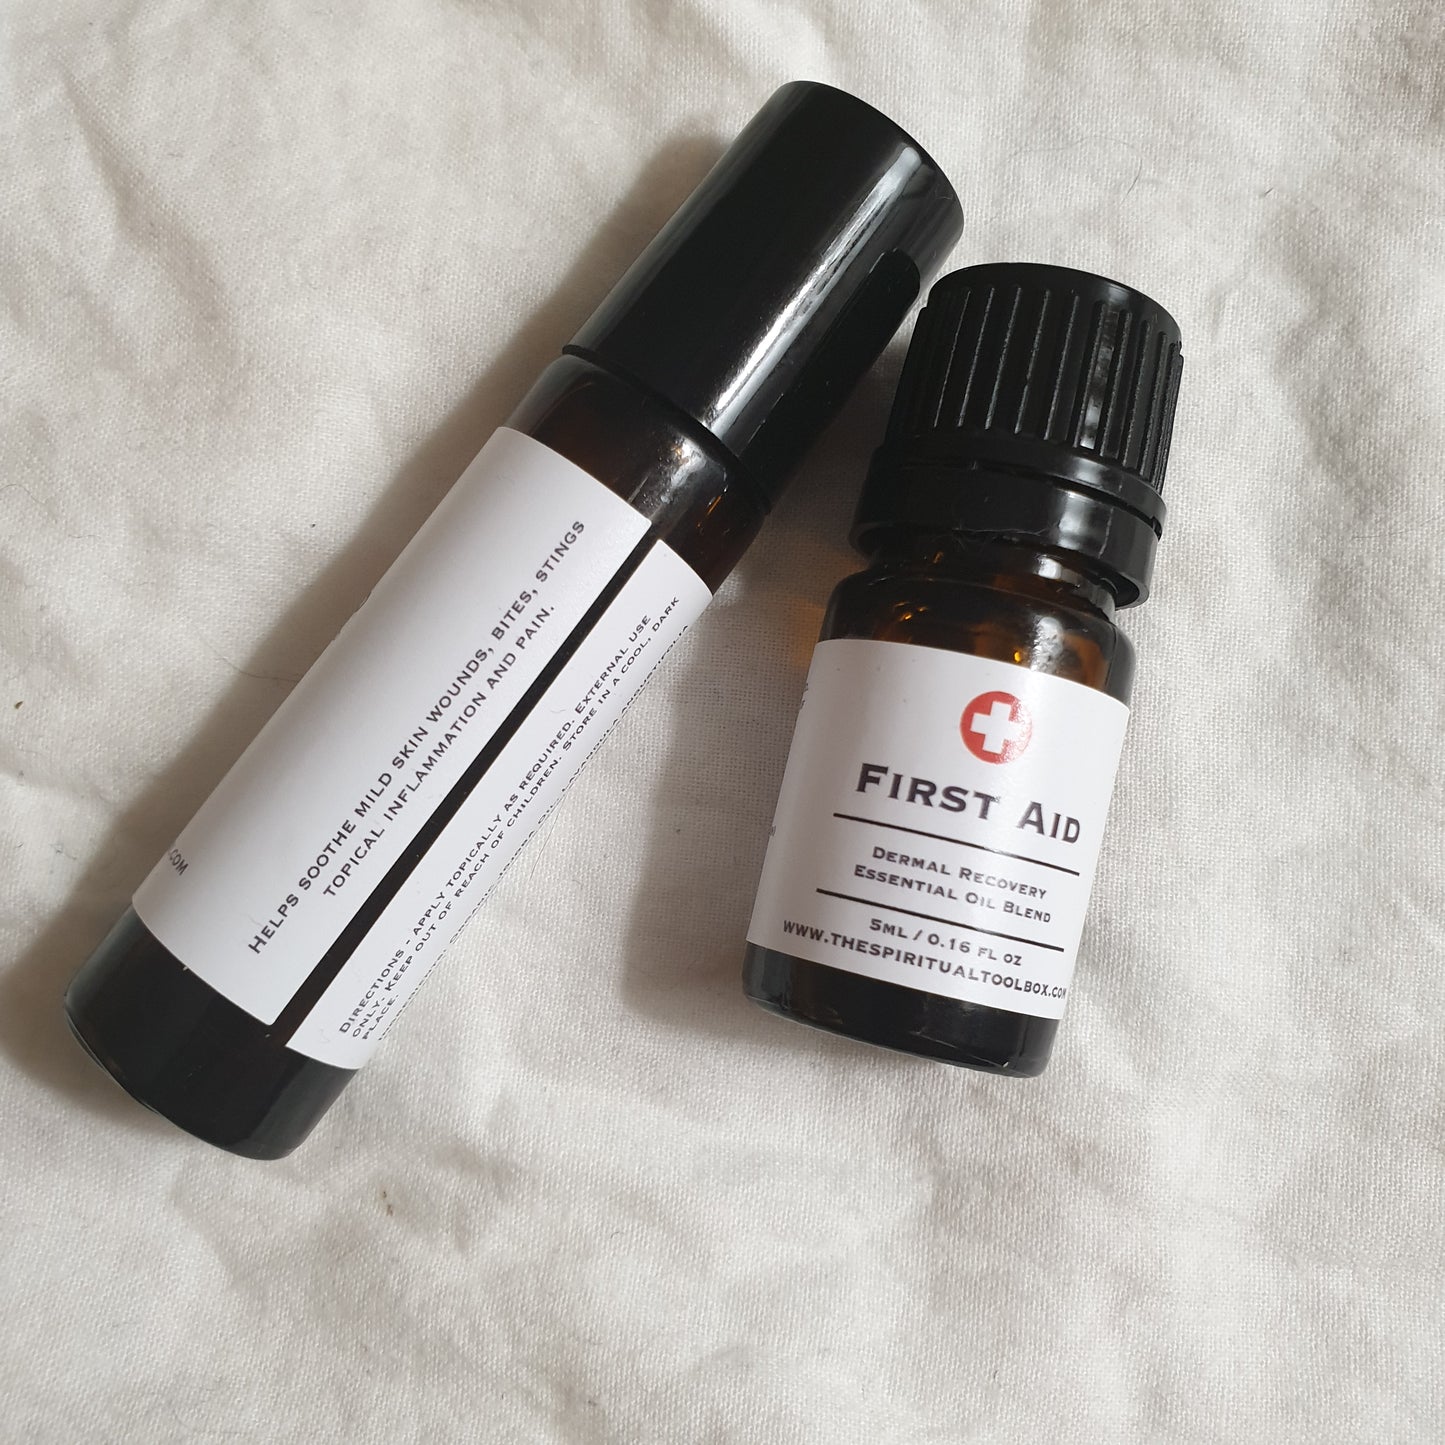 First Aid - Dermal Recovery Blend